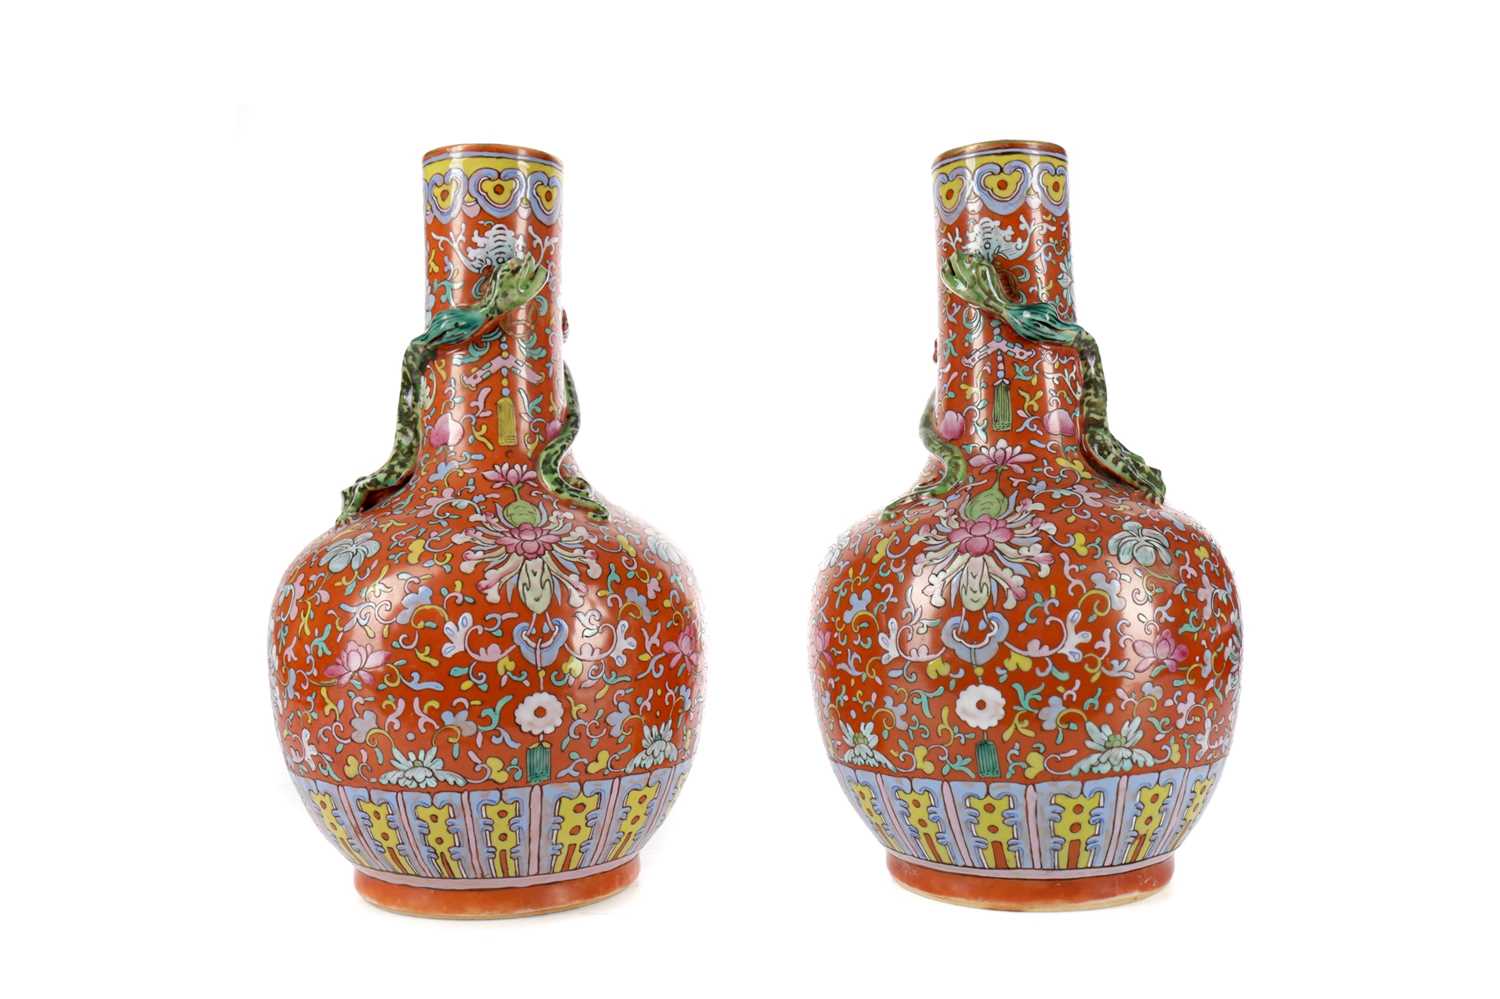 Lot 706 - A PAIR OF LATE 19TH CENTURY CHINESE BOTTLE SHAPED VASES